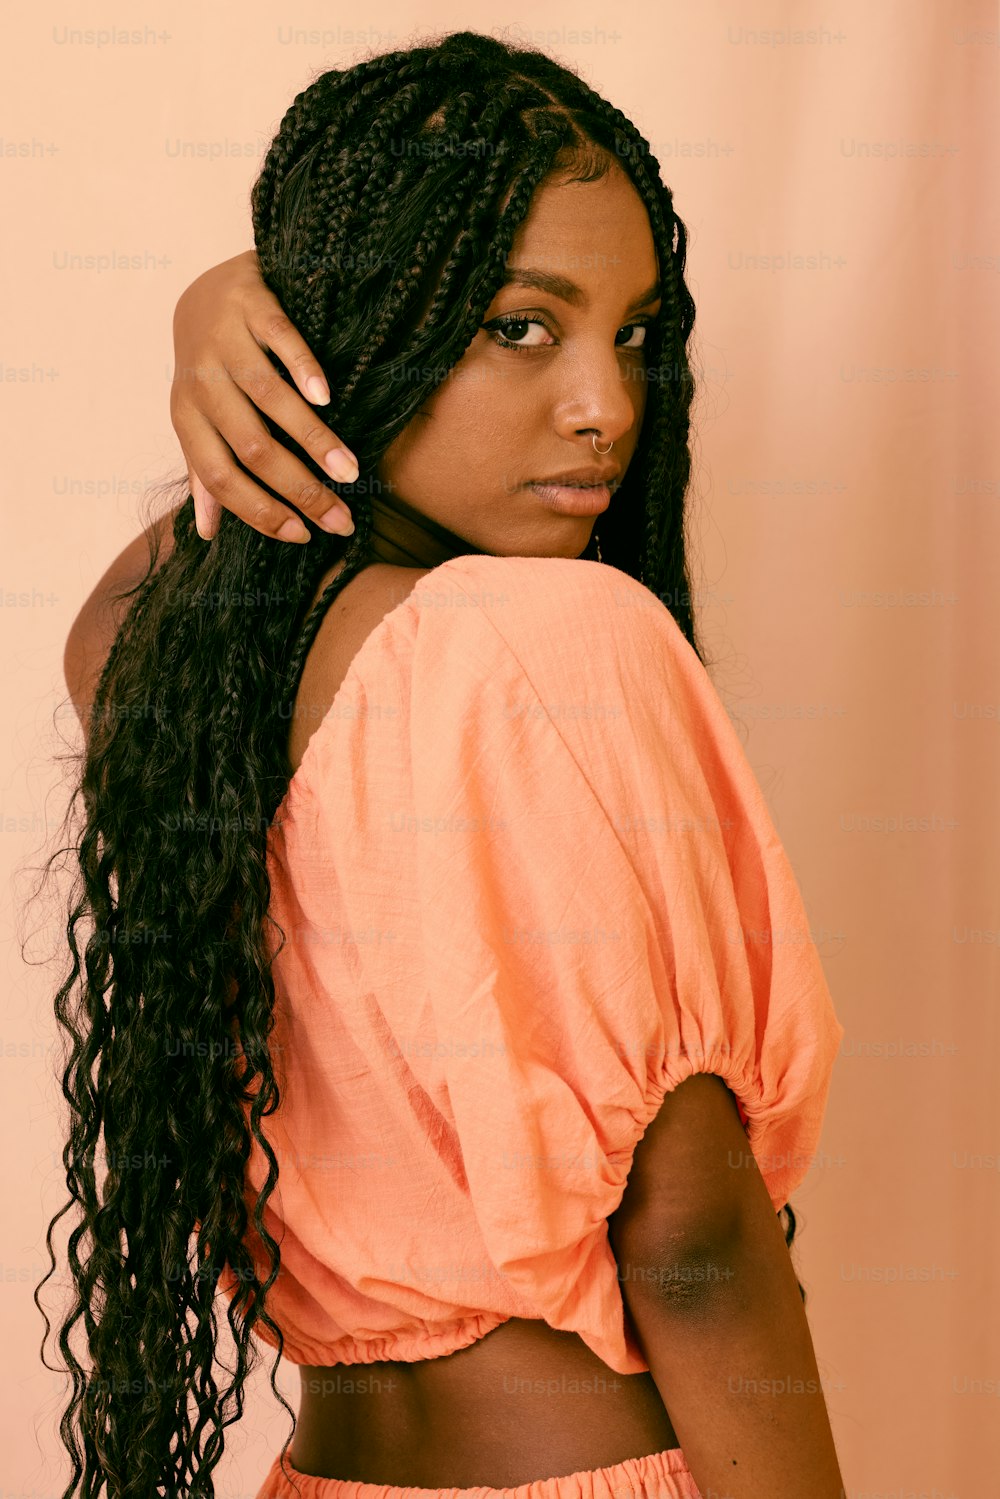 a woman with long hair wearing an orange top